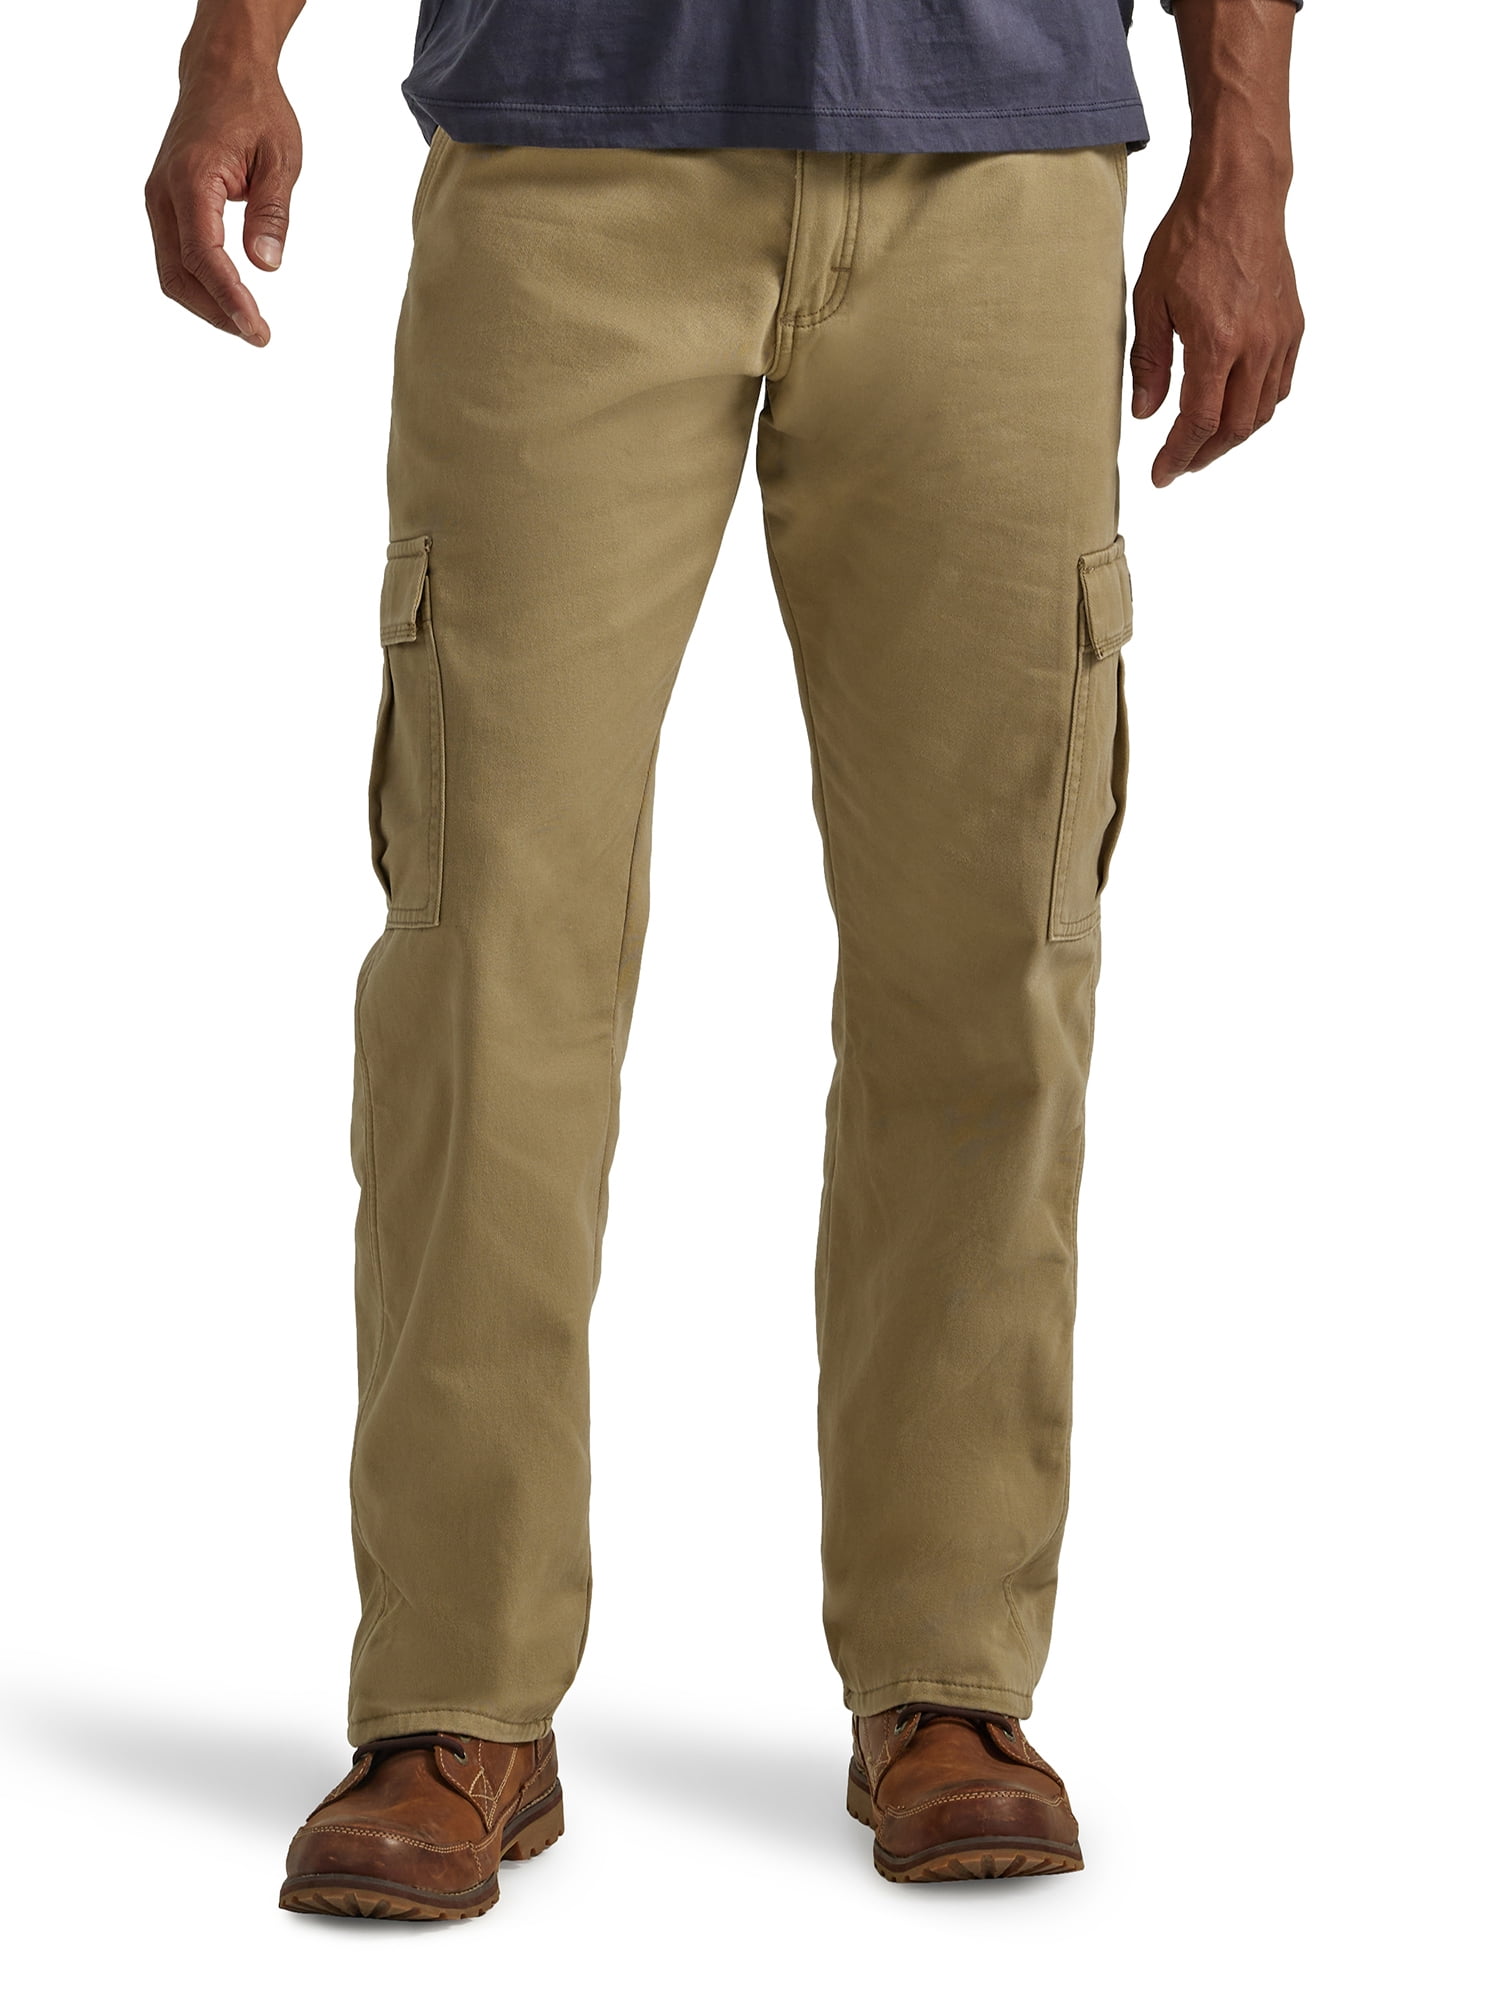 Wrangler® Men's and Big Men's Relaxed Fit Fleece Lined Cargo Pant ...